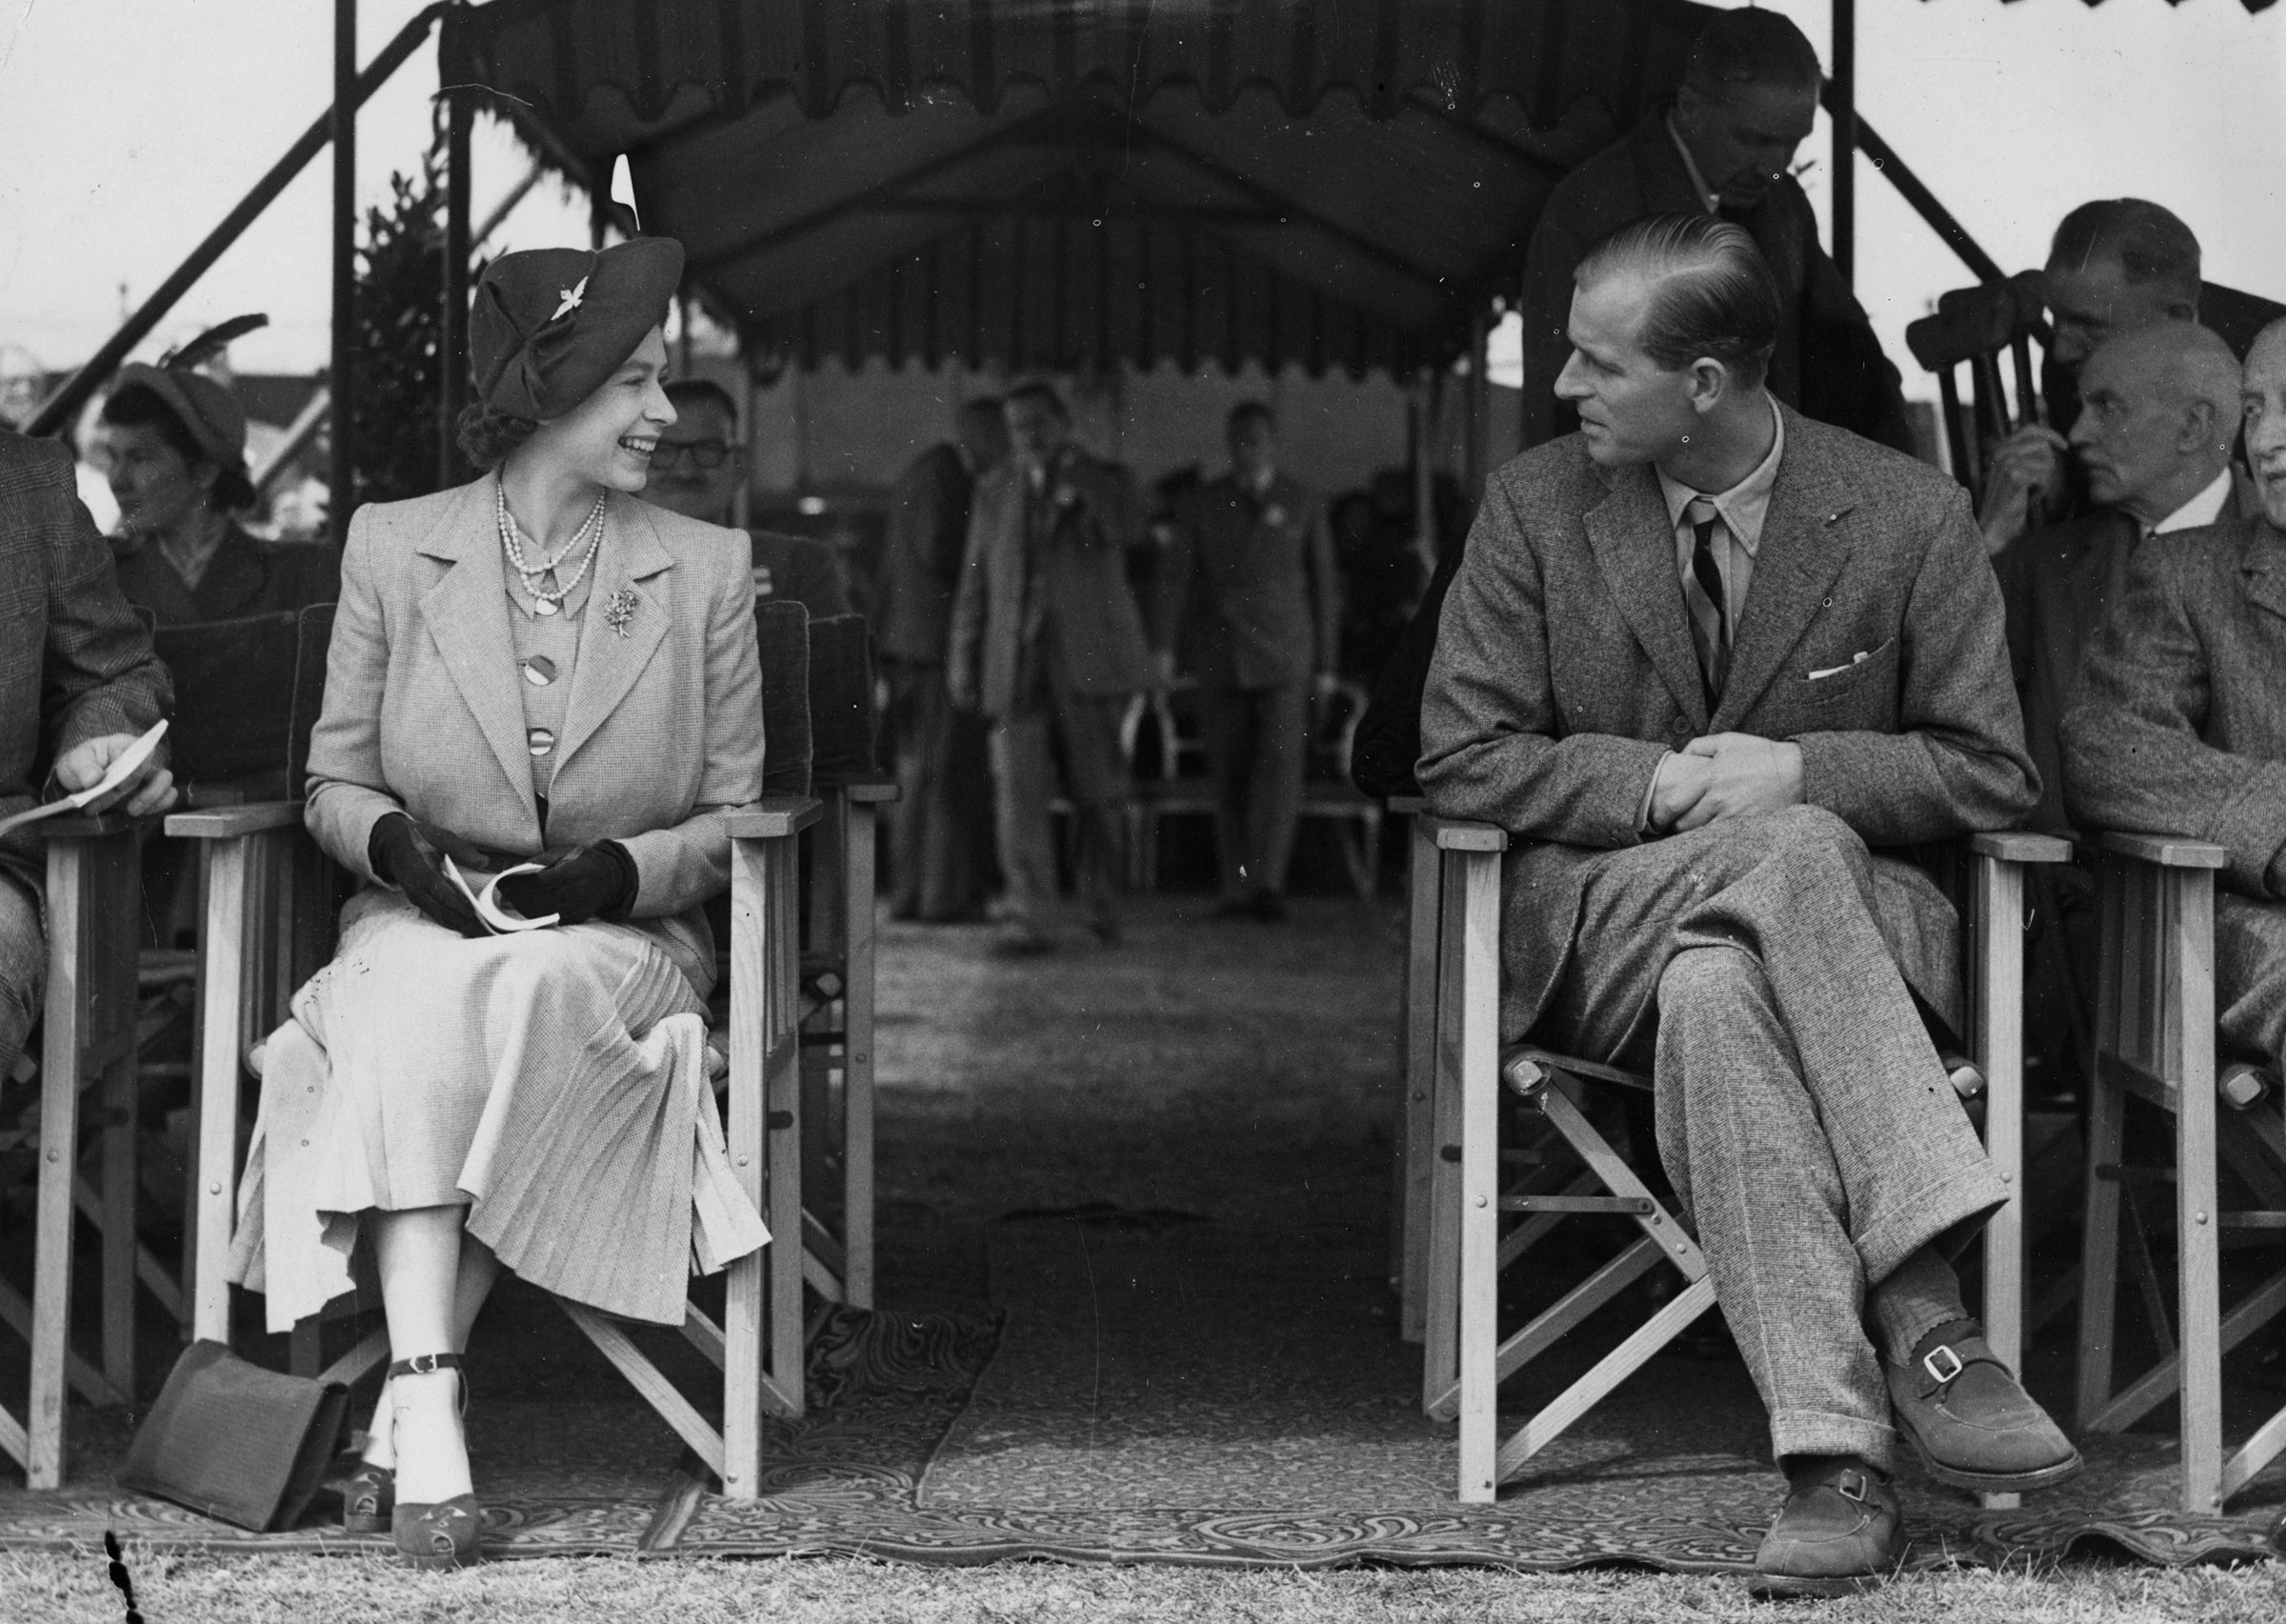 Princess Elizabeth and the Duke of Edinburgh attending the Royal Horse Show at Windsor on May 12, 1949.